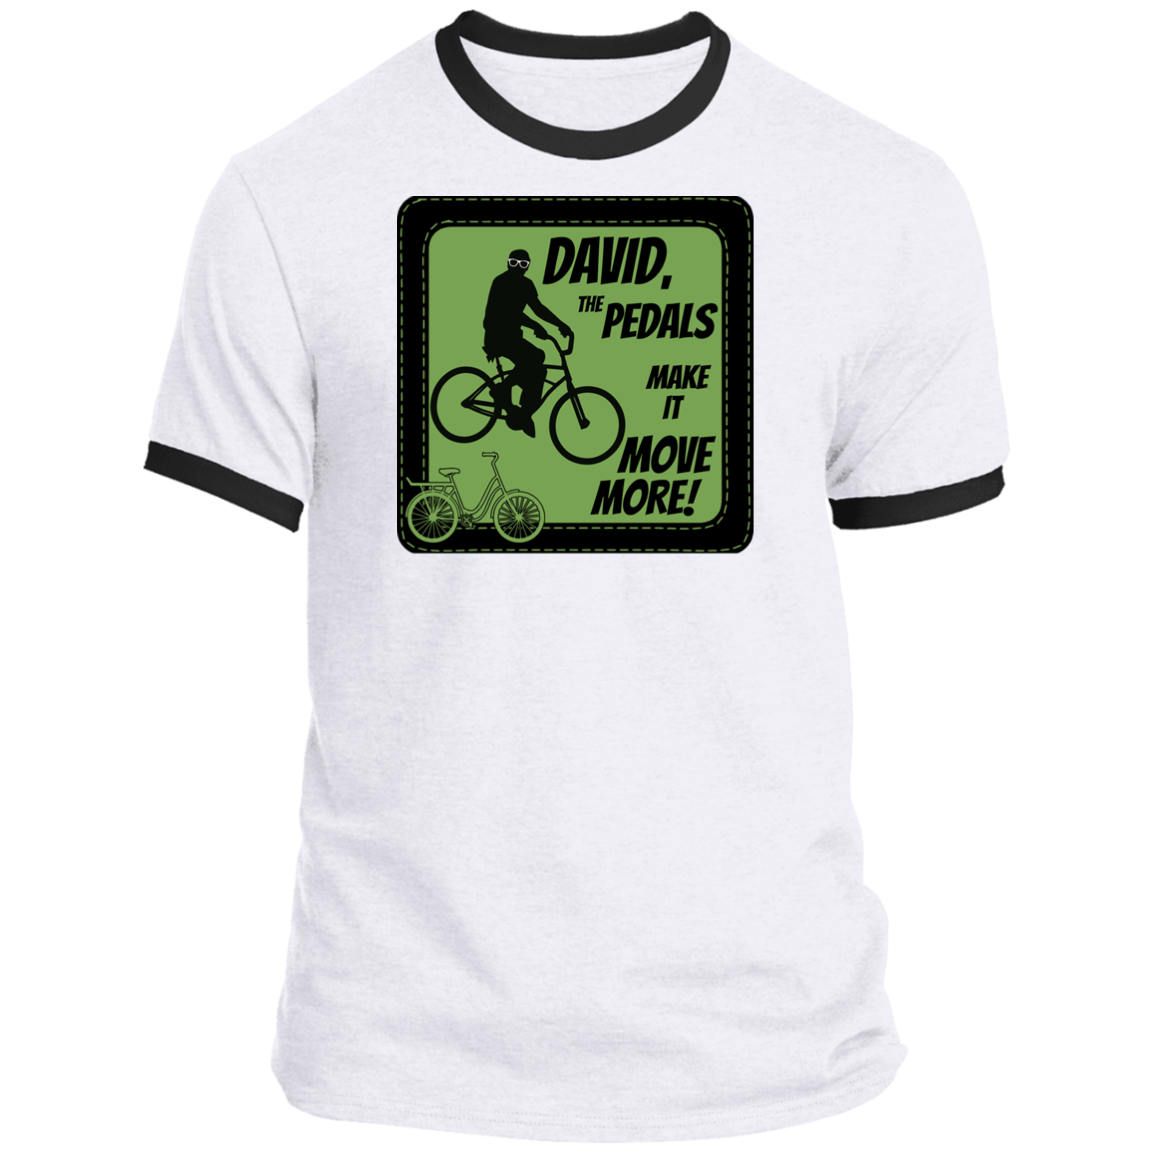 Pedals Make it Move More - Unisex Ringer Tee PC54R